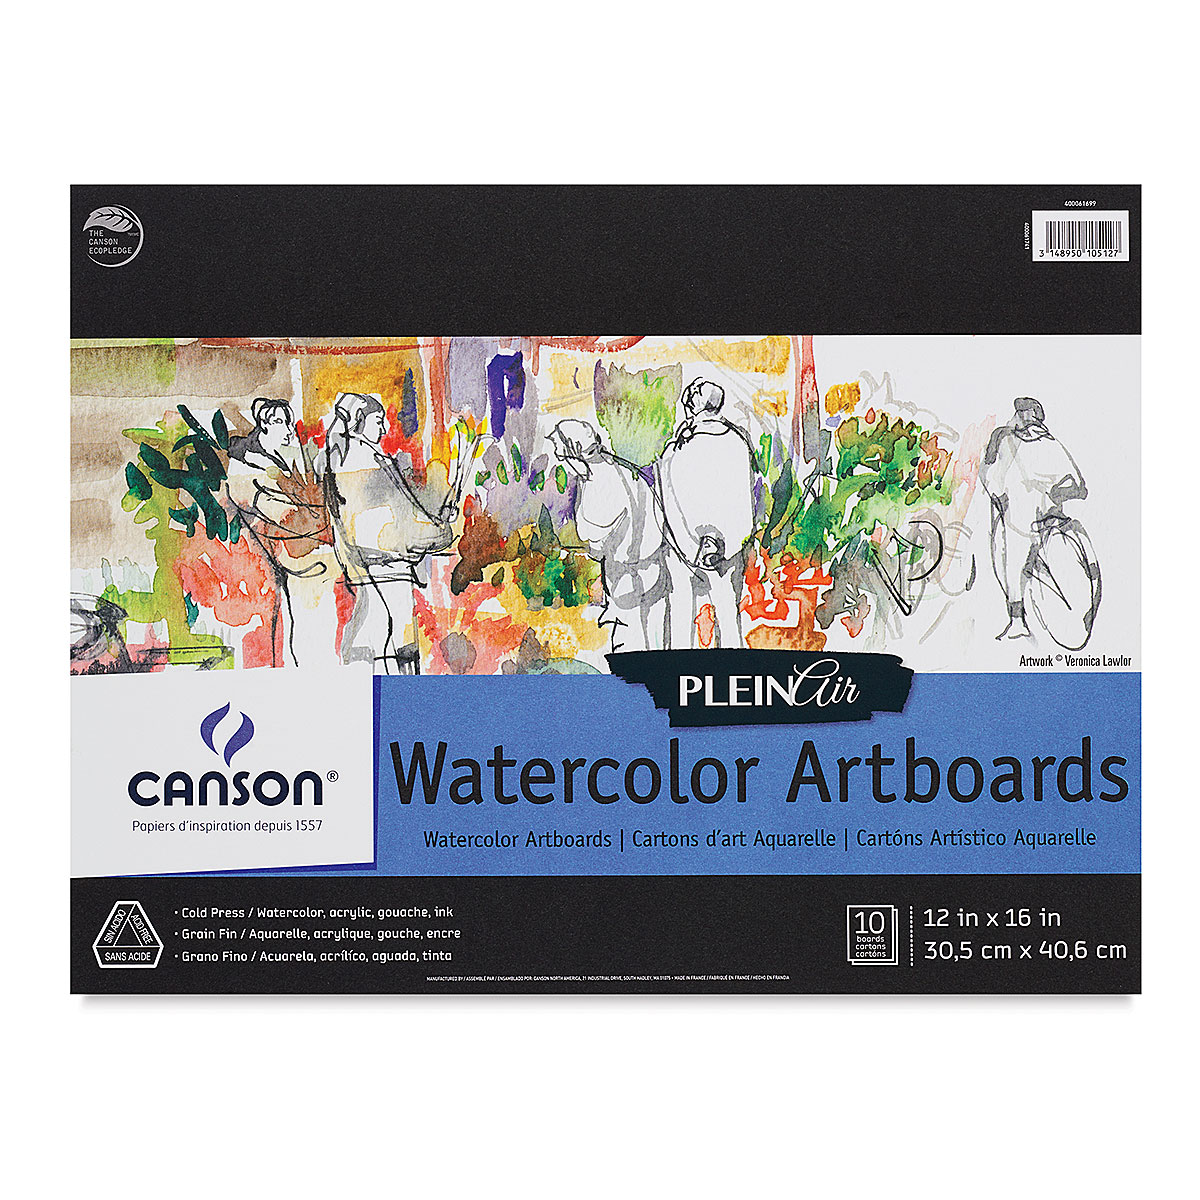 2 x Canson Watercolor Paper Pad, 30-sheet, 9-Inch by 12-Inch, X-Large